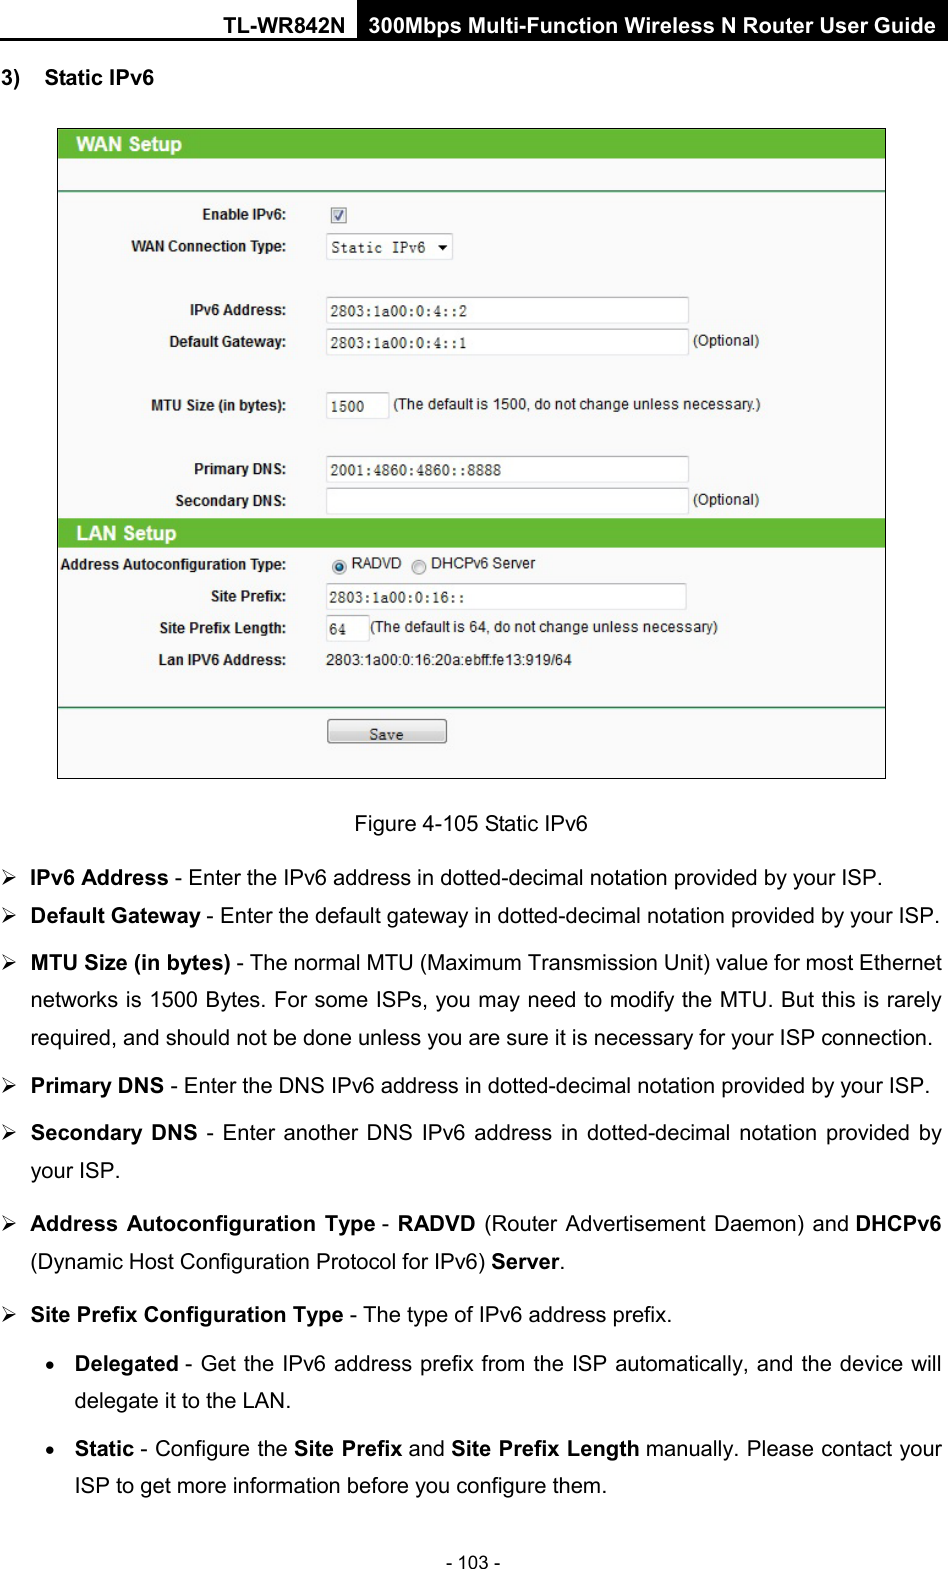 TL-WR842N 300Mbps Multi-Function Wireless N Router User Guide  - 103 - 3) Static IPv6  Figure 4-105 Static IPv6  IPv6 Address - Enter the IPv6 address in dotted-decimal notation provided by your ISP.  Default Gateway - Enter the default gateway in dotted-decimal notation provided by your ISP.  MTU Size (in bytes) - The normal MTU (Maximum Transmission Unit) value for most Ethernet networks is 1500 Bytes. For some ISPs, you may need to modify the MTU. But this is rarely required, and should not be done unless you are sure it is necessary for your ISP connection.  Primary DNS - Enter the DNS IPv6 address in dotted-decimal notation provided by your ISP.  Secondary DNS - Enter another DNS IPv6 address in dotted-decimal notation provided by your ISP.  Address Autoconfiguration Type - RADVD (Router Advertisement Daemon) and DHCPv6 (Dynamic Host Configuration Protocol for IPv6) Server.  Site Prefix Configuration Type - The type of IPv6 address prefix. • Delegated - Get the IPv6 address prefix from the ISP automatically, and the device will delegate it to the LAN. • Static - Configure the Site Prefix and Site Prefix Length manually. Please contact your ISP to get more information before you configure them. 